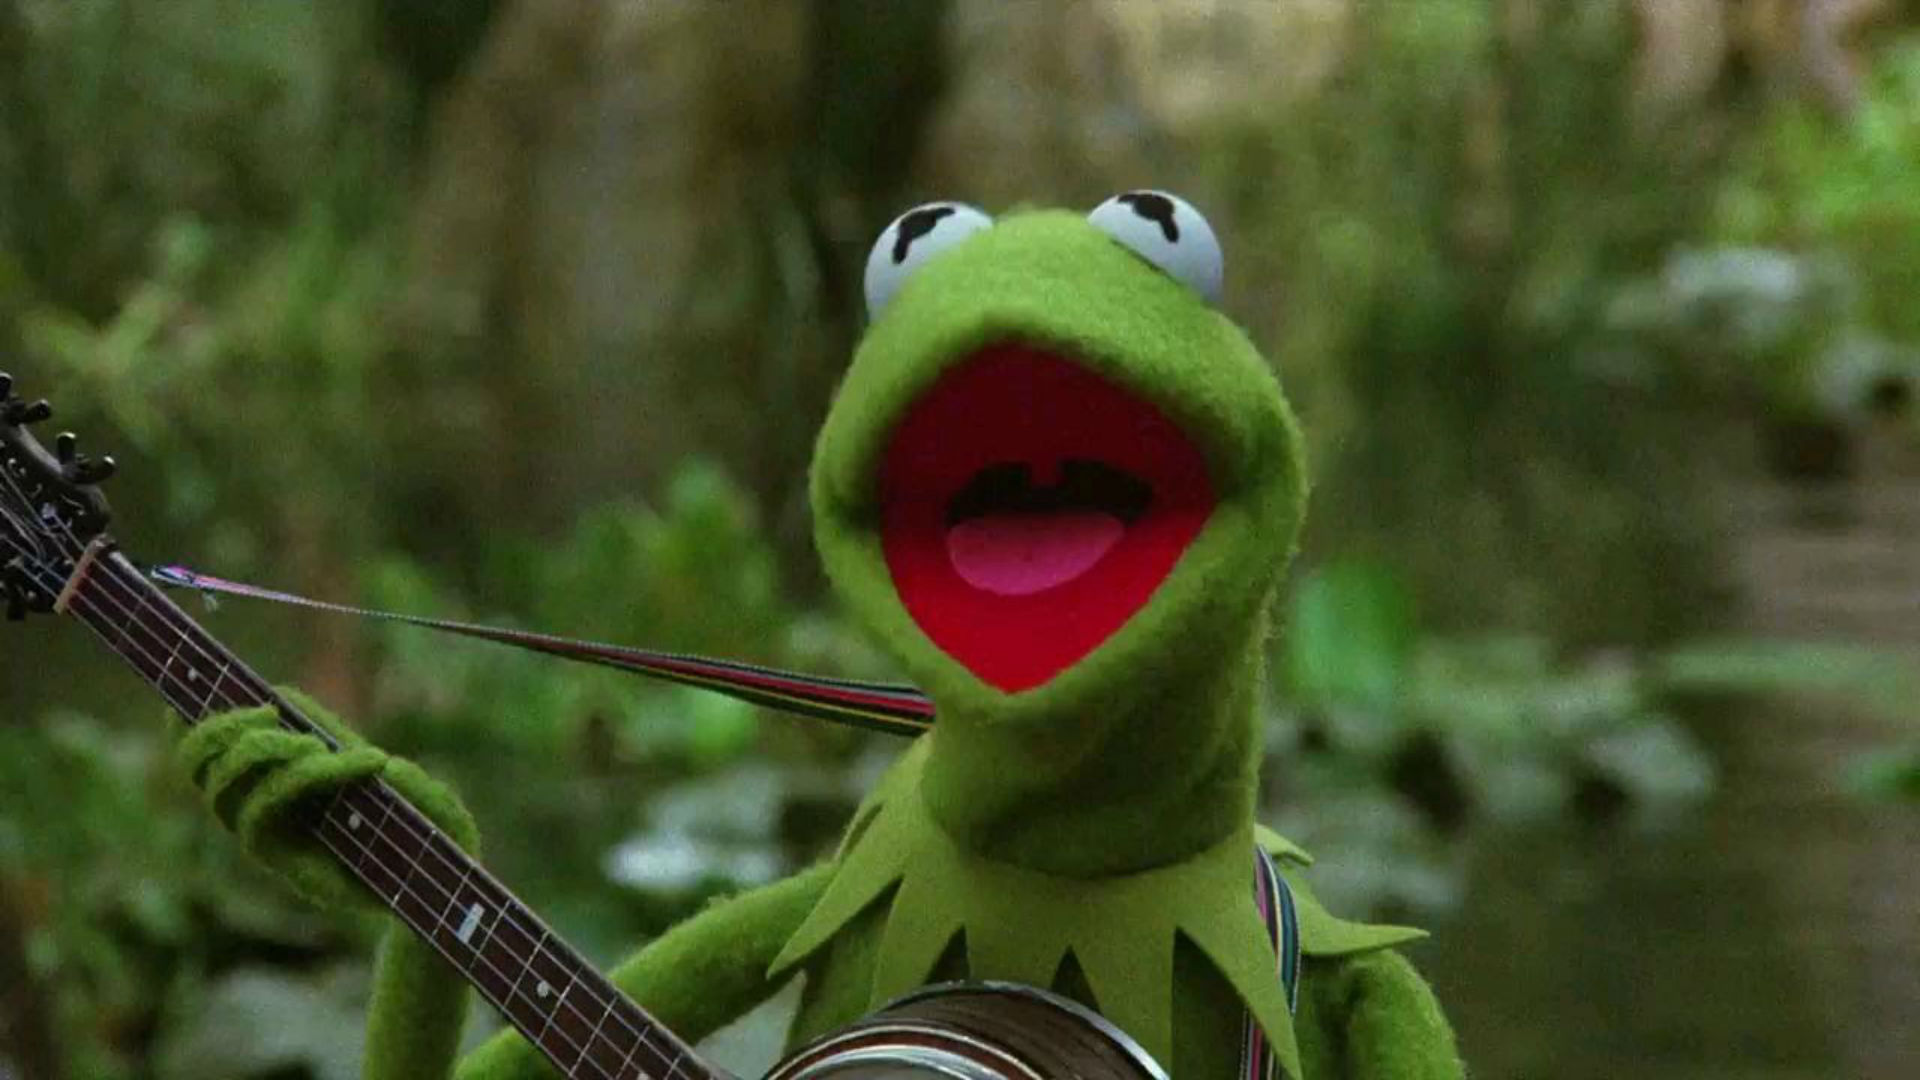 kermit the frog mad